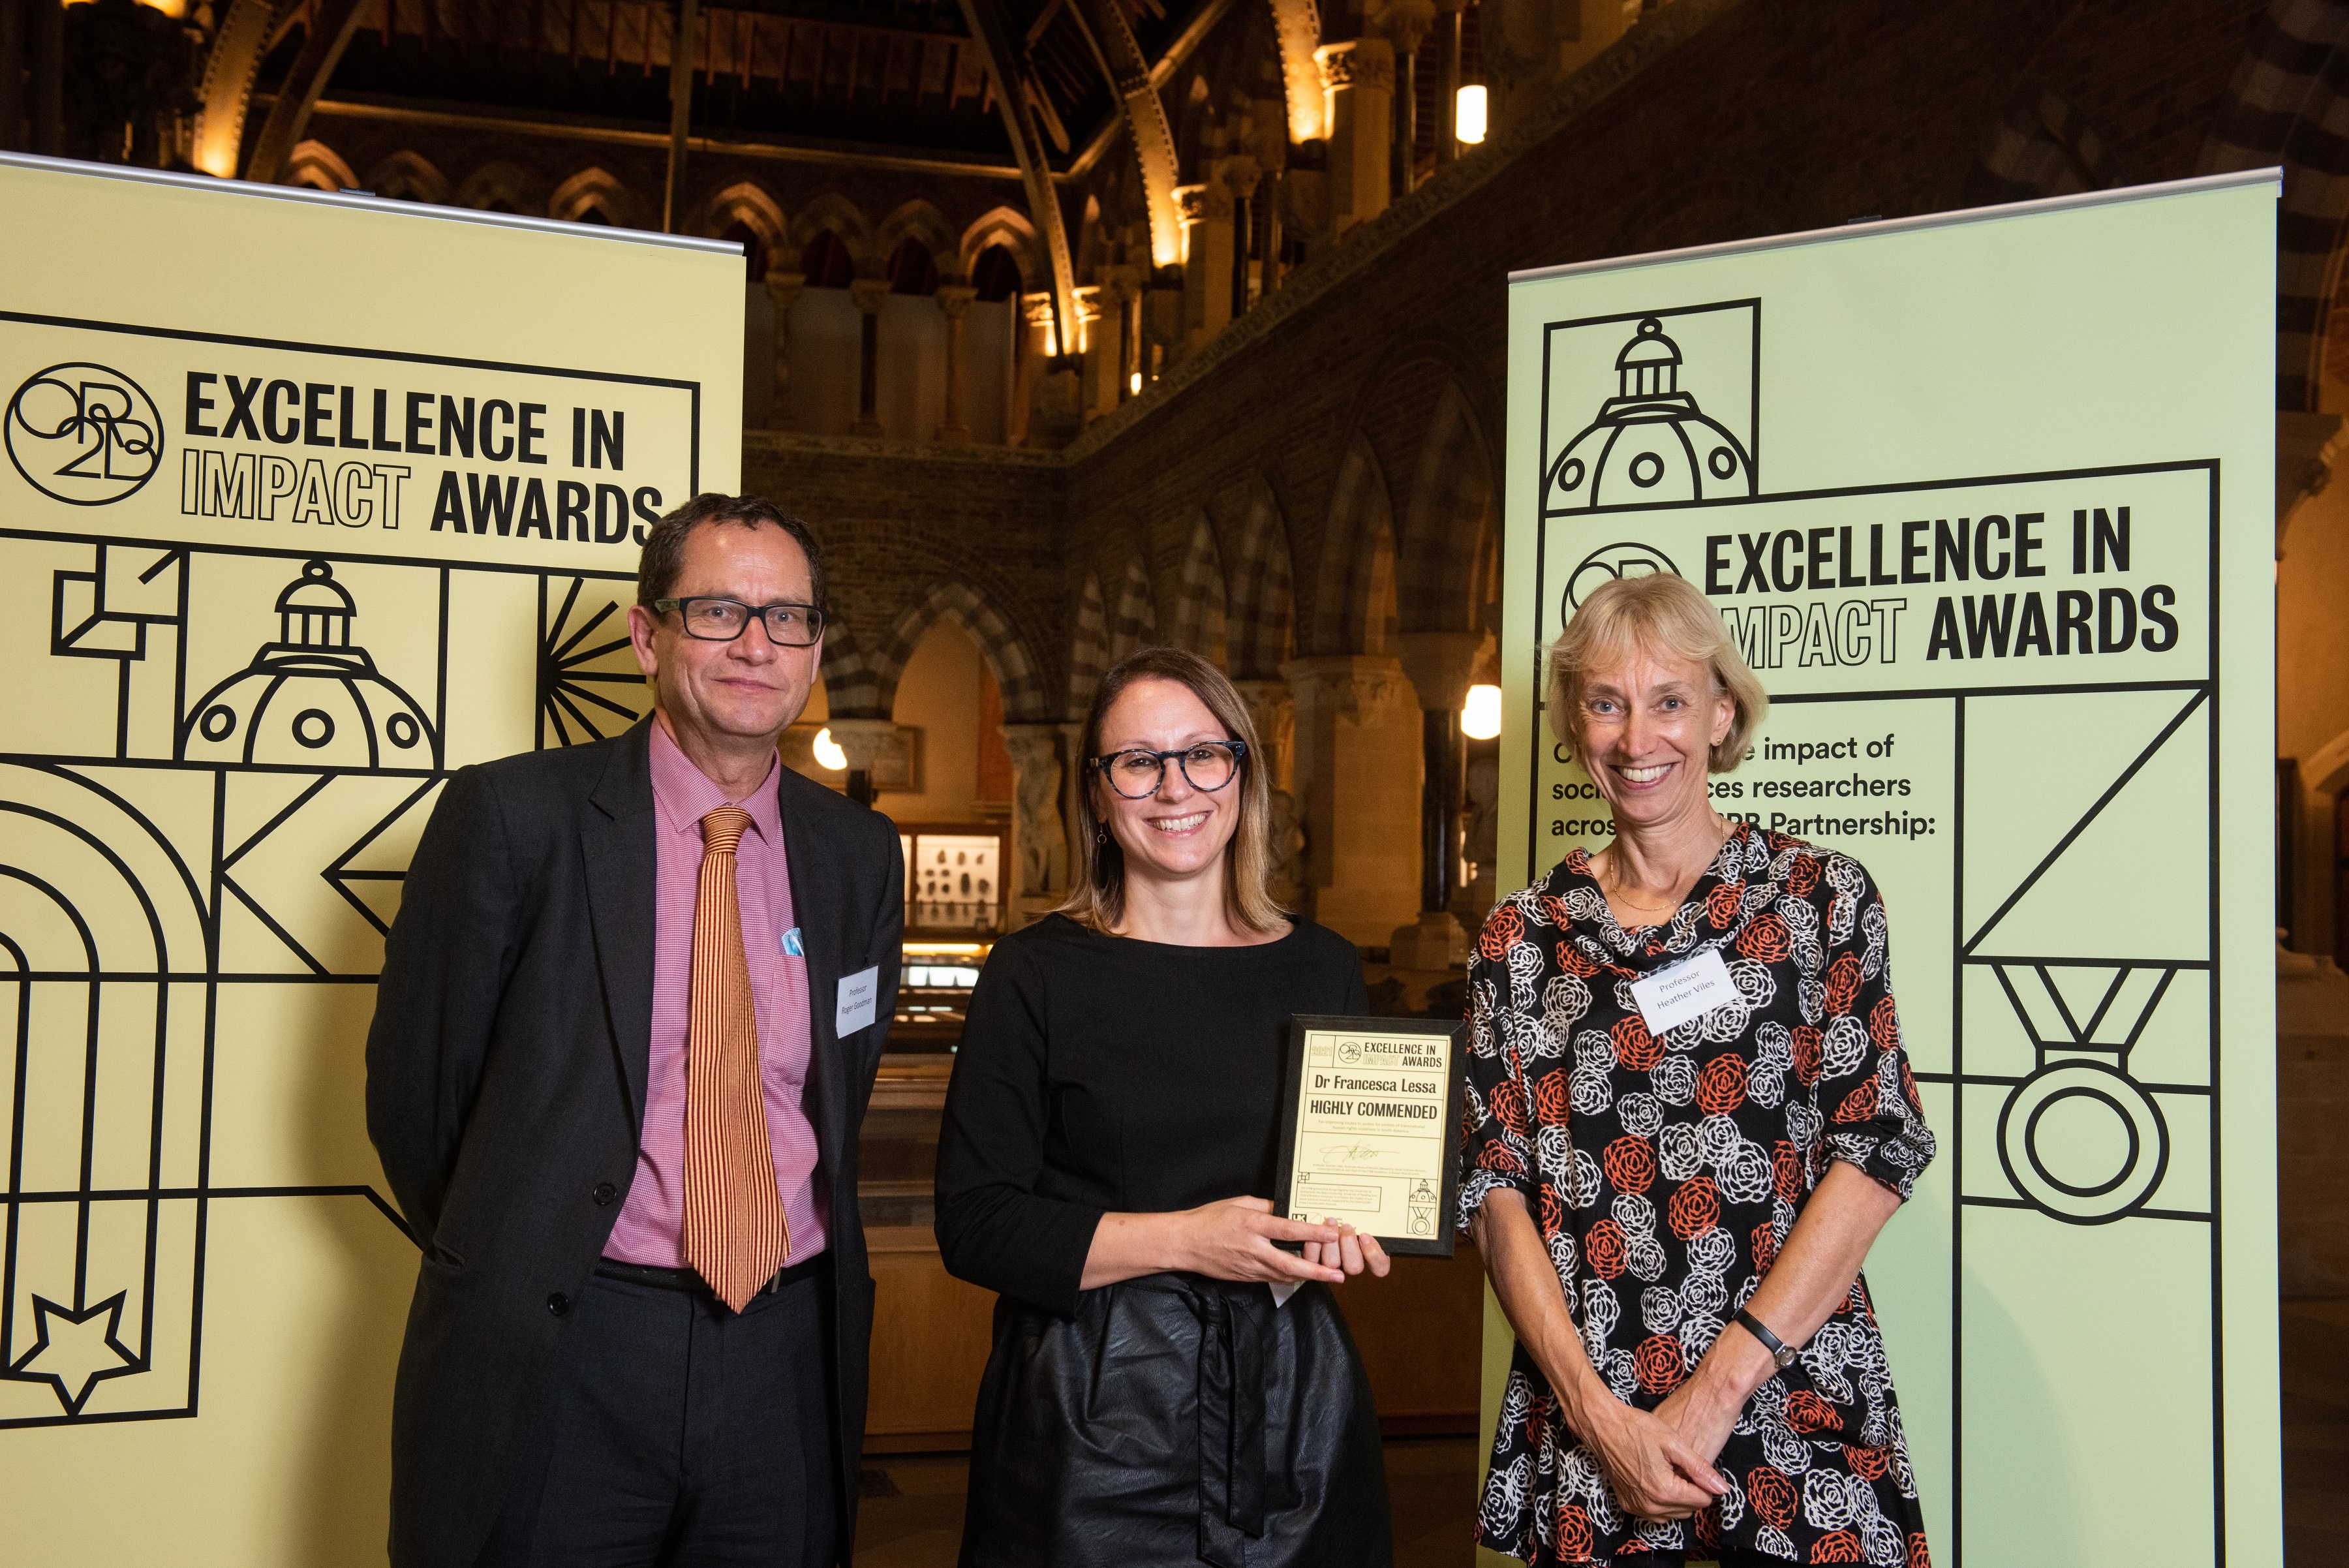 Dr Francesca Lessa holds her Excellence in Impact Awards 'Highly Commended' certificate in front of the event branding, flanked by Professor Roger Goodman and Prof Heather Viles 